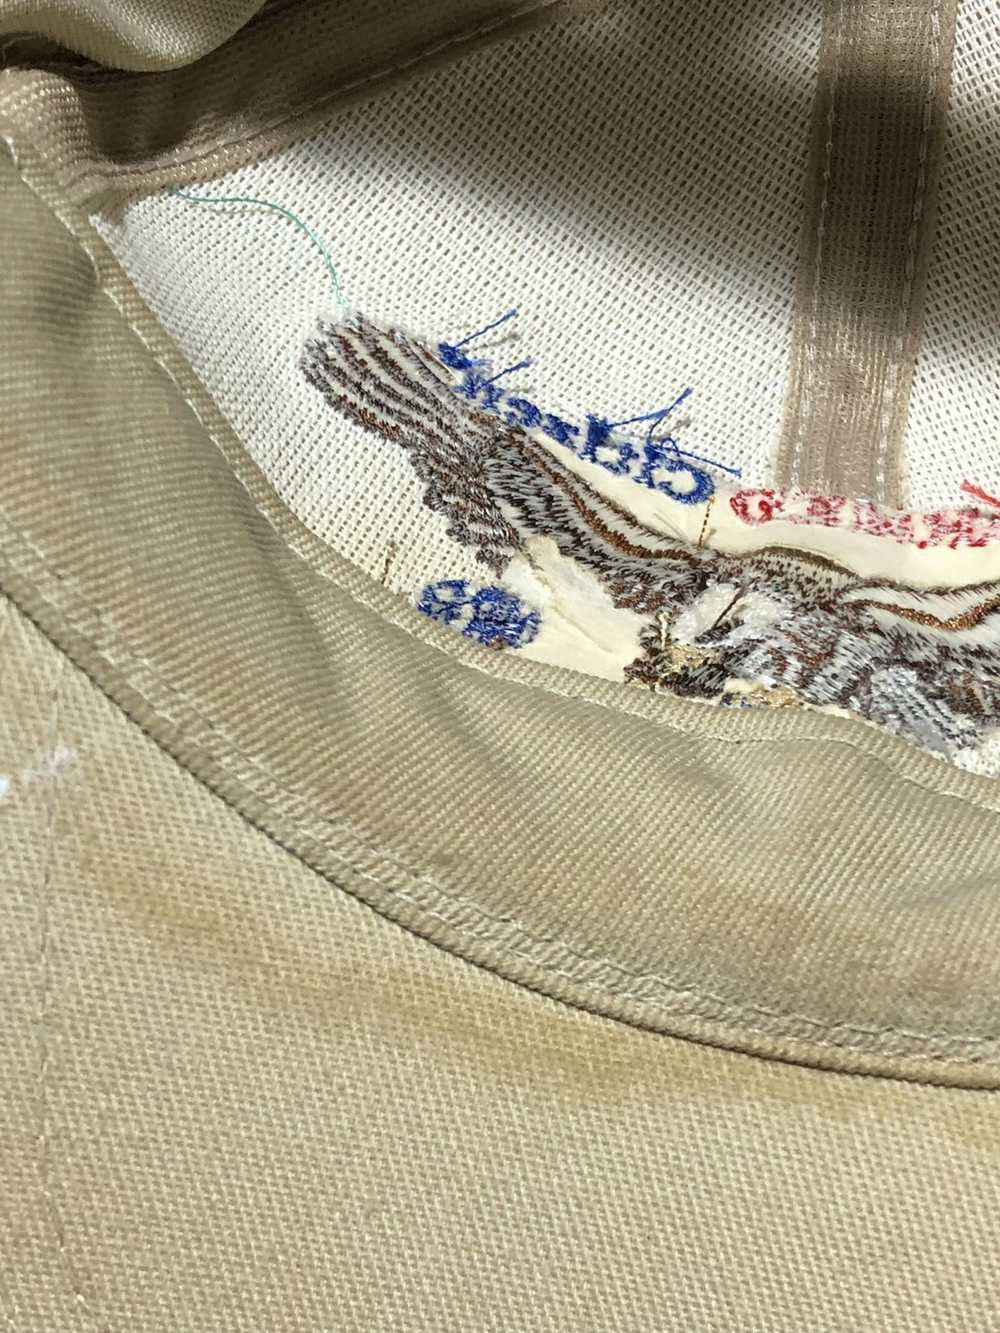 Vintage 90s “The Armed Citizen” NRA Snapback - image 7